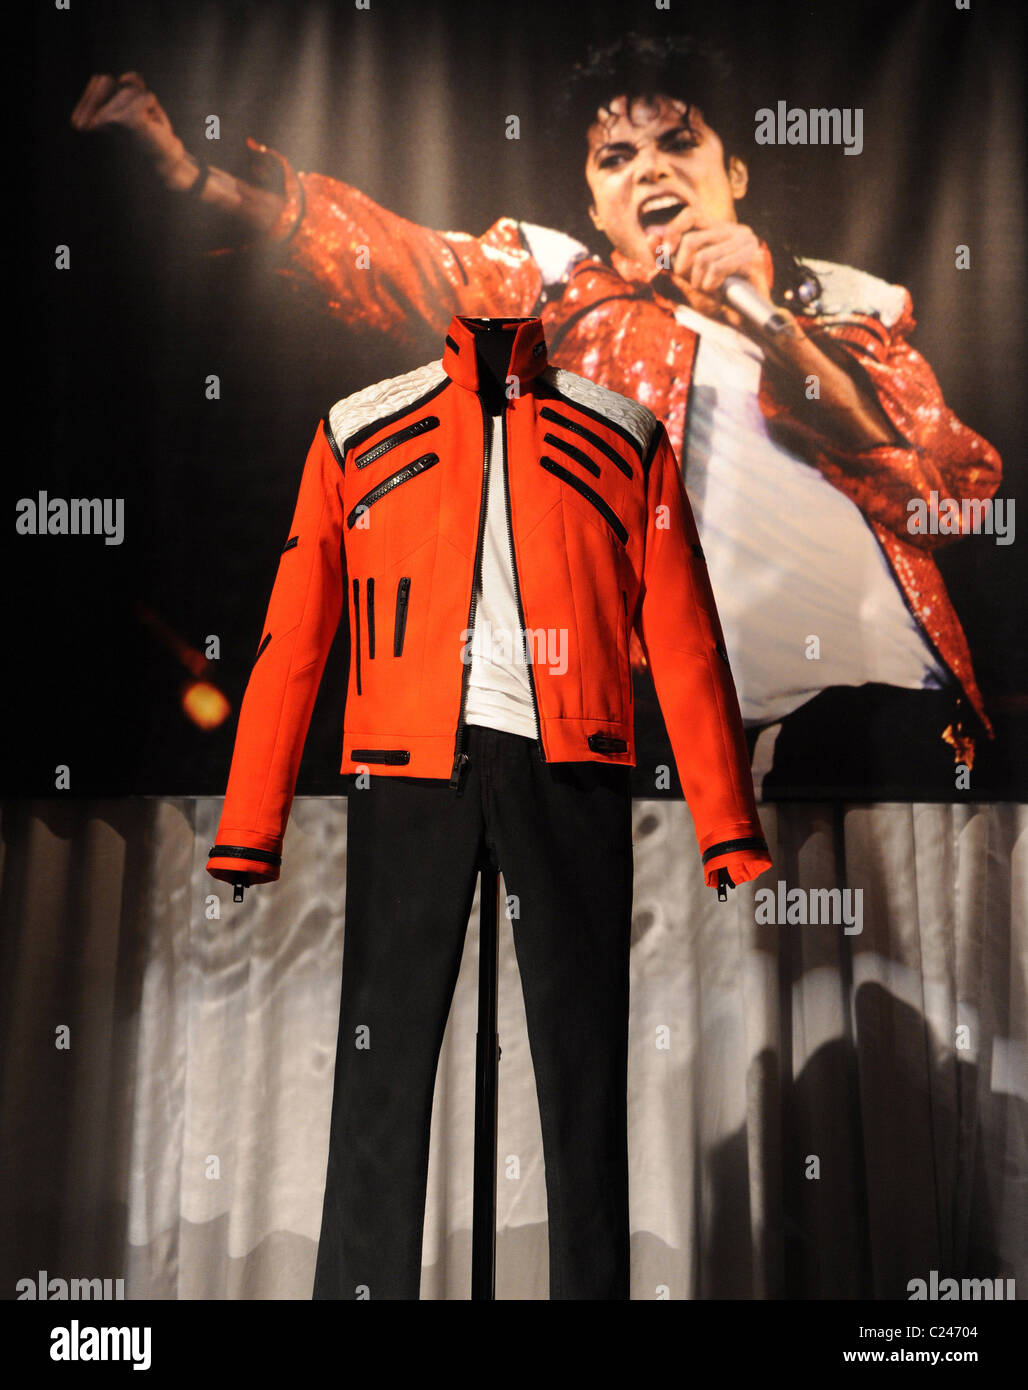 Jacket - Clothing Michael Jackson's 'This Is It' Exhibition at the O2 Arena  London, England  Stock Photo - Alamy